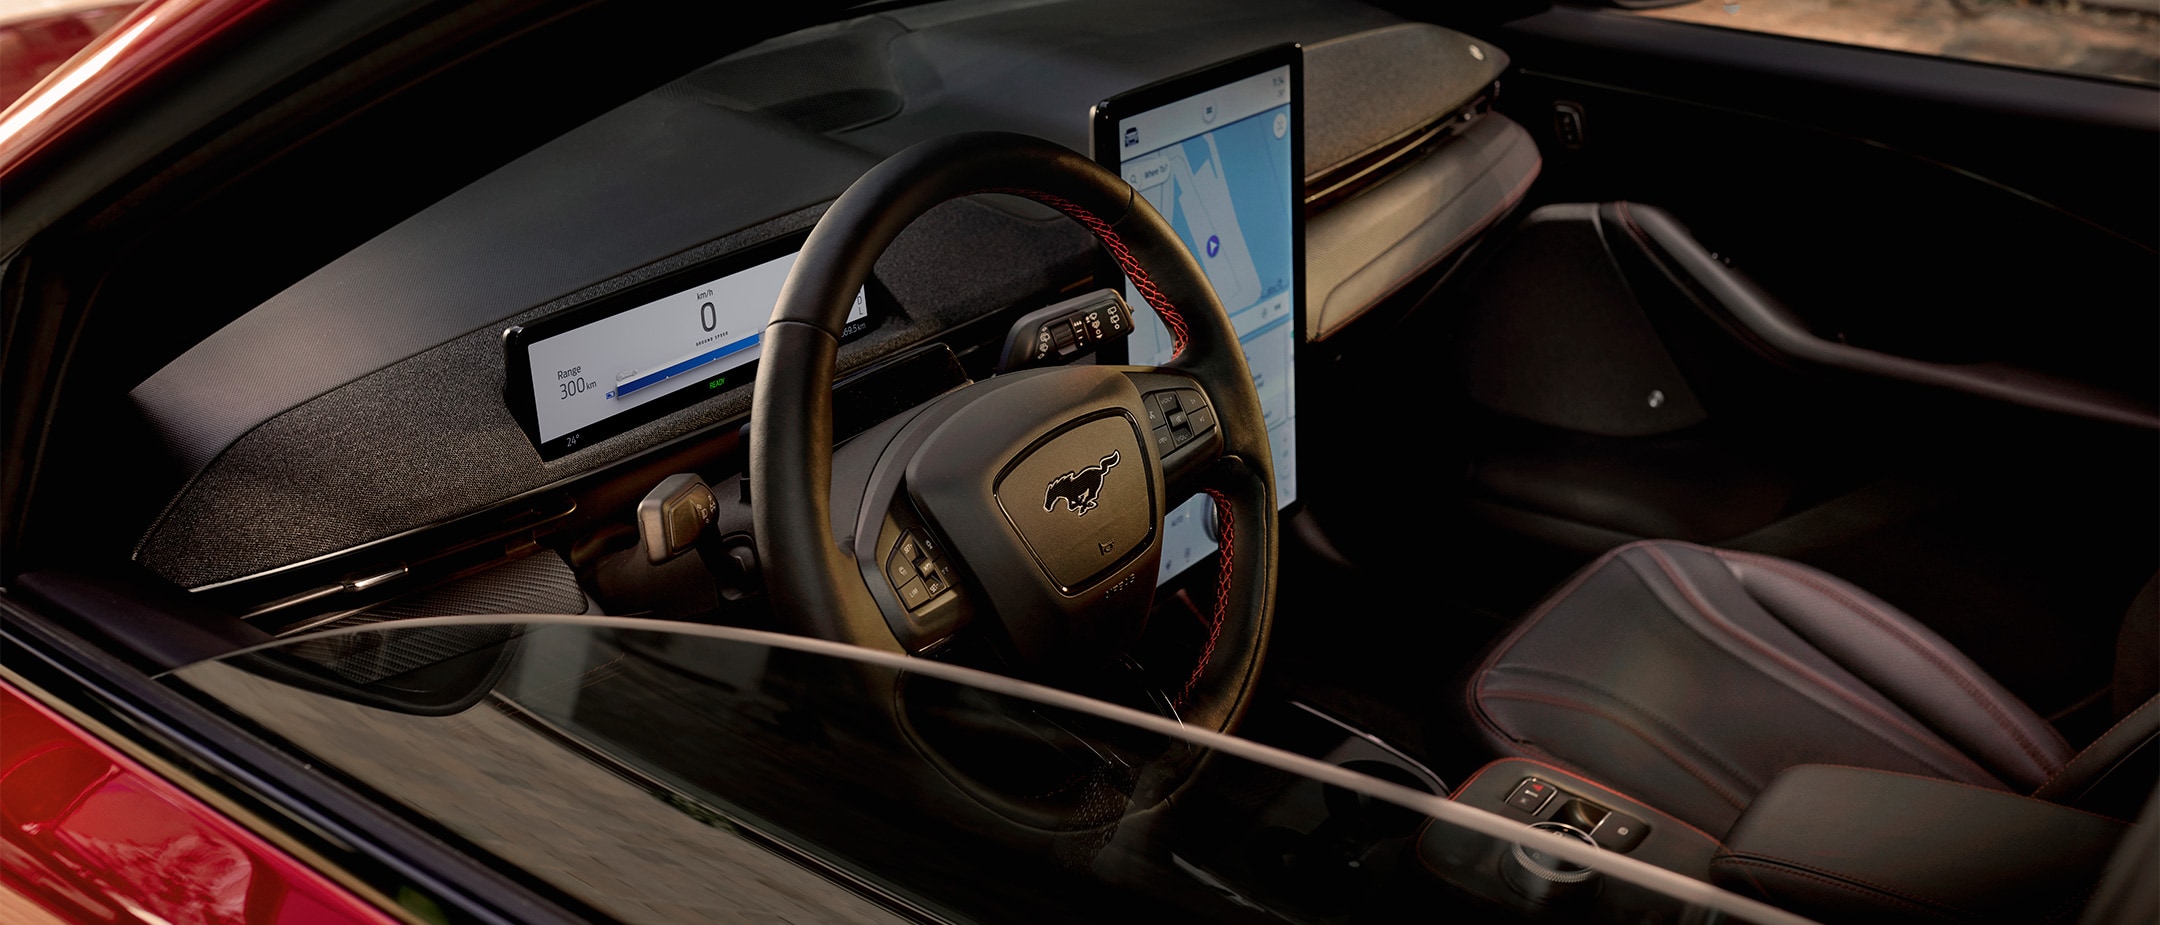 All-New Ford Mustang Mach-E interior with the steering wheel and Next Generation SYNC screen